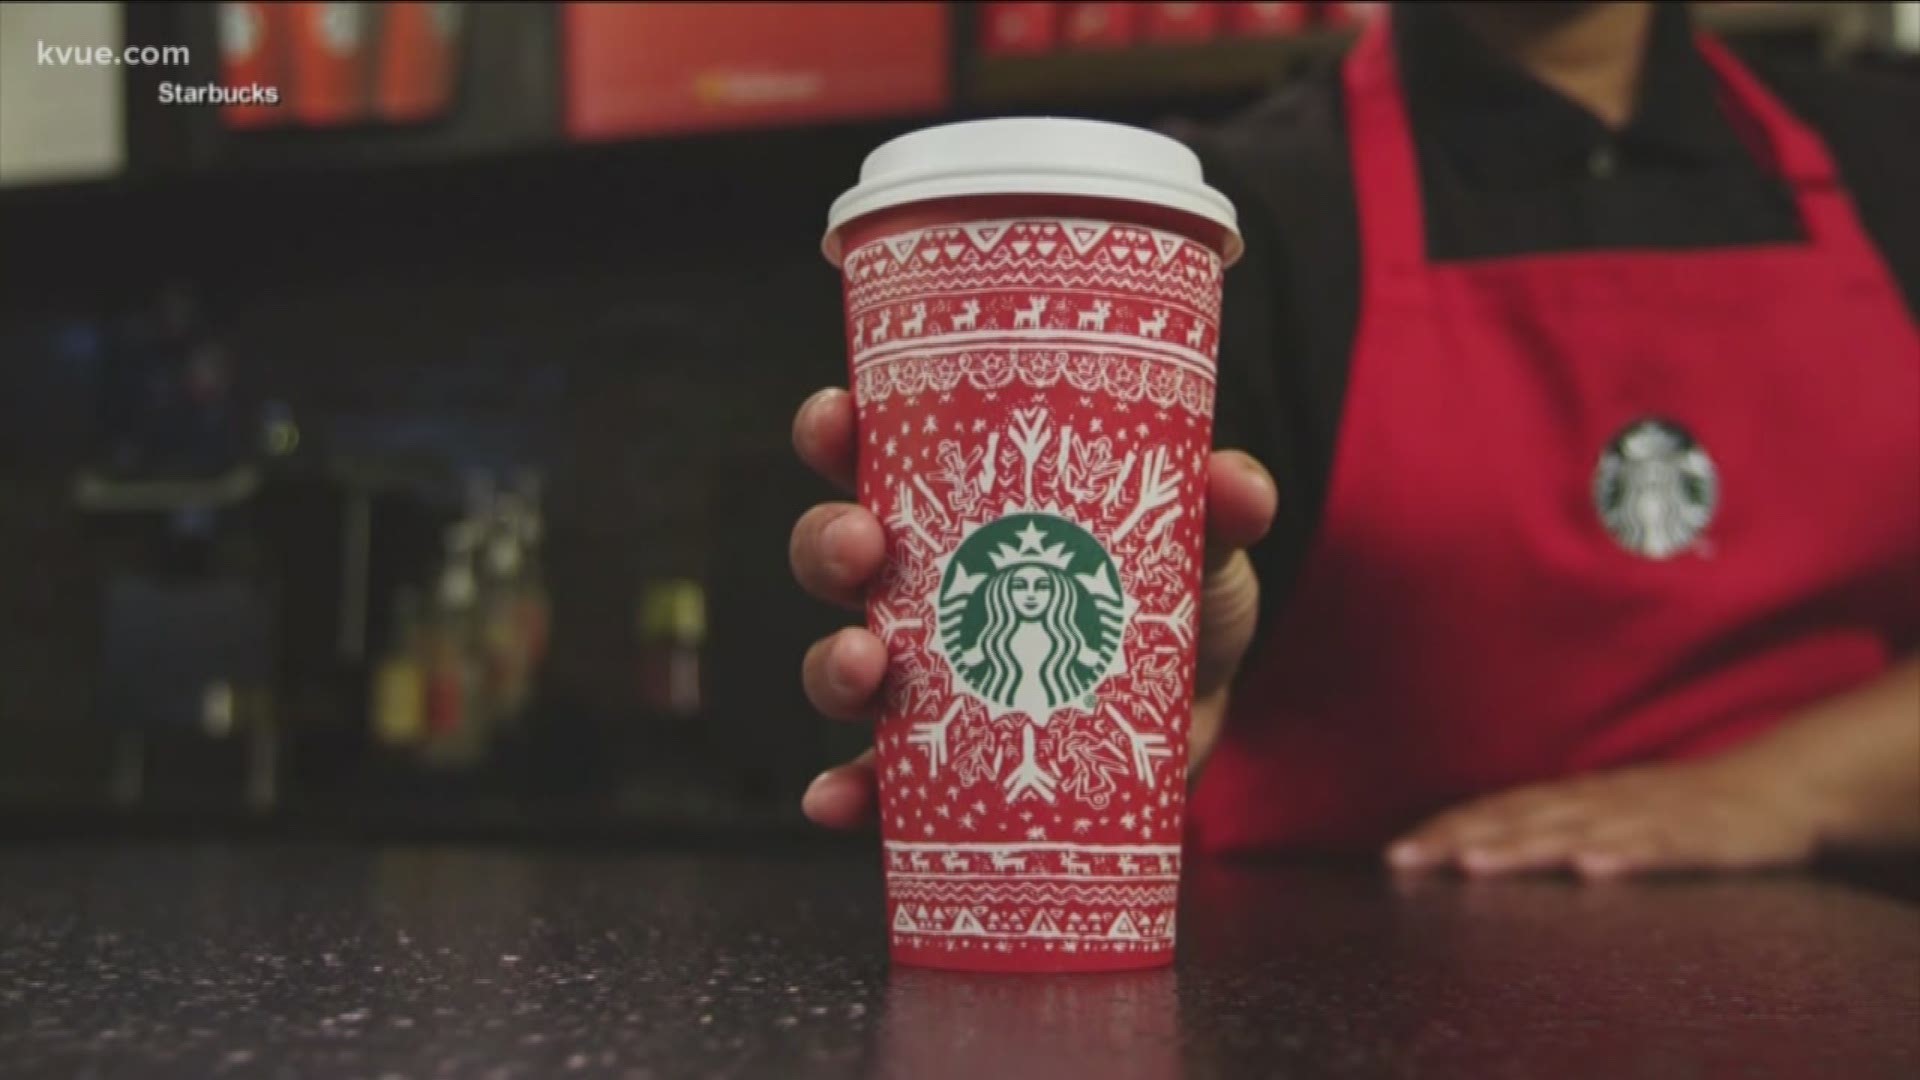 Starbucks is celebrating the end of the year by giving out free espresso. Here's how you can get yours!